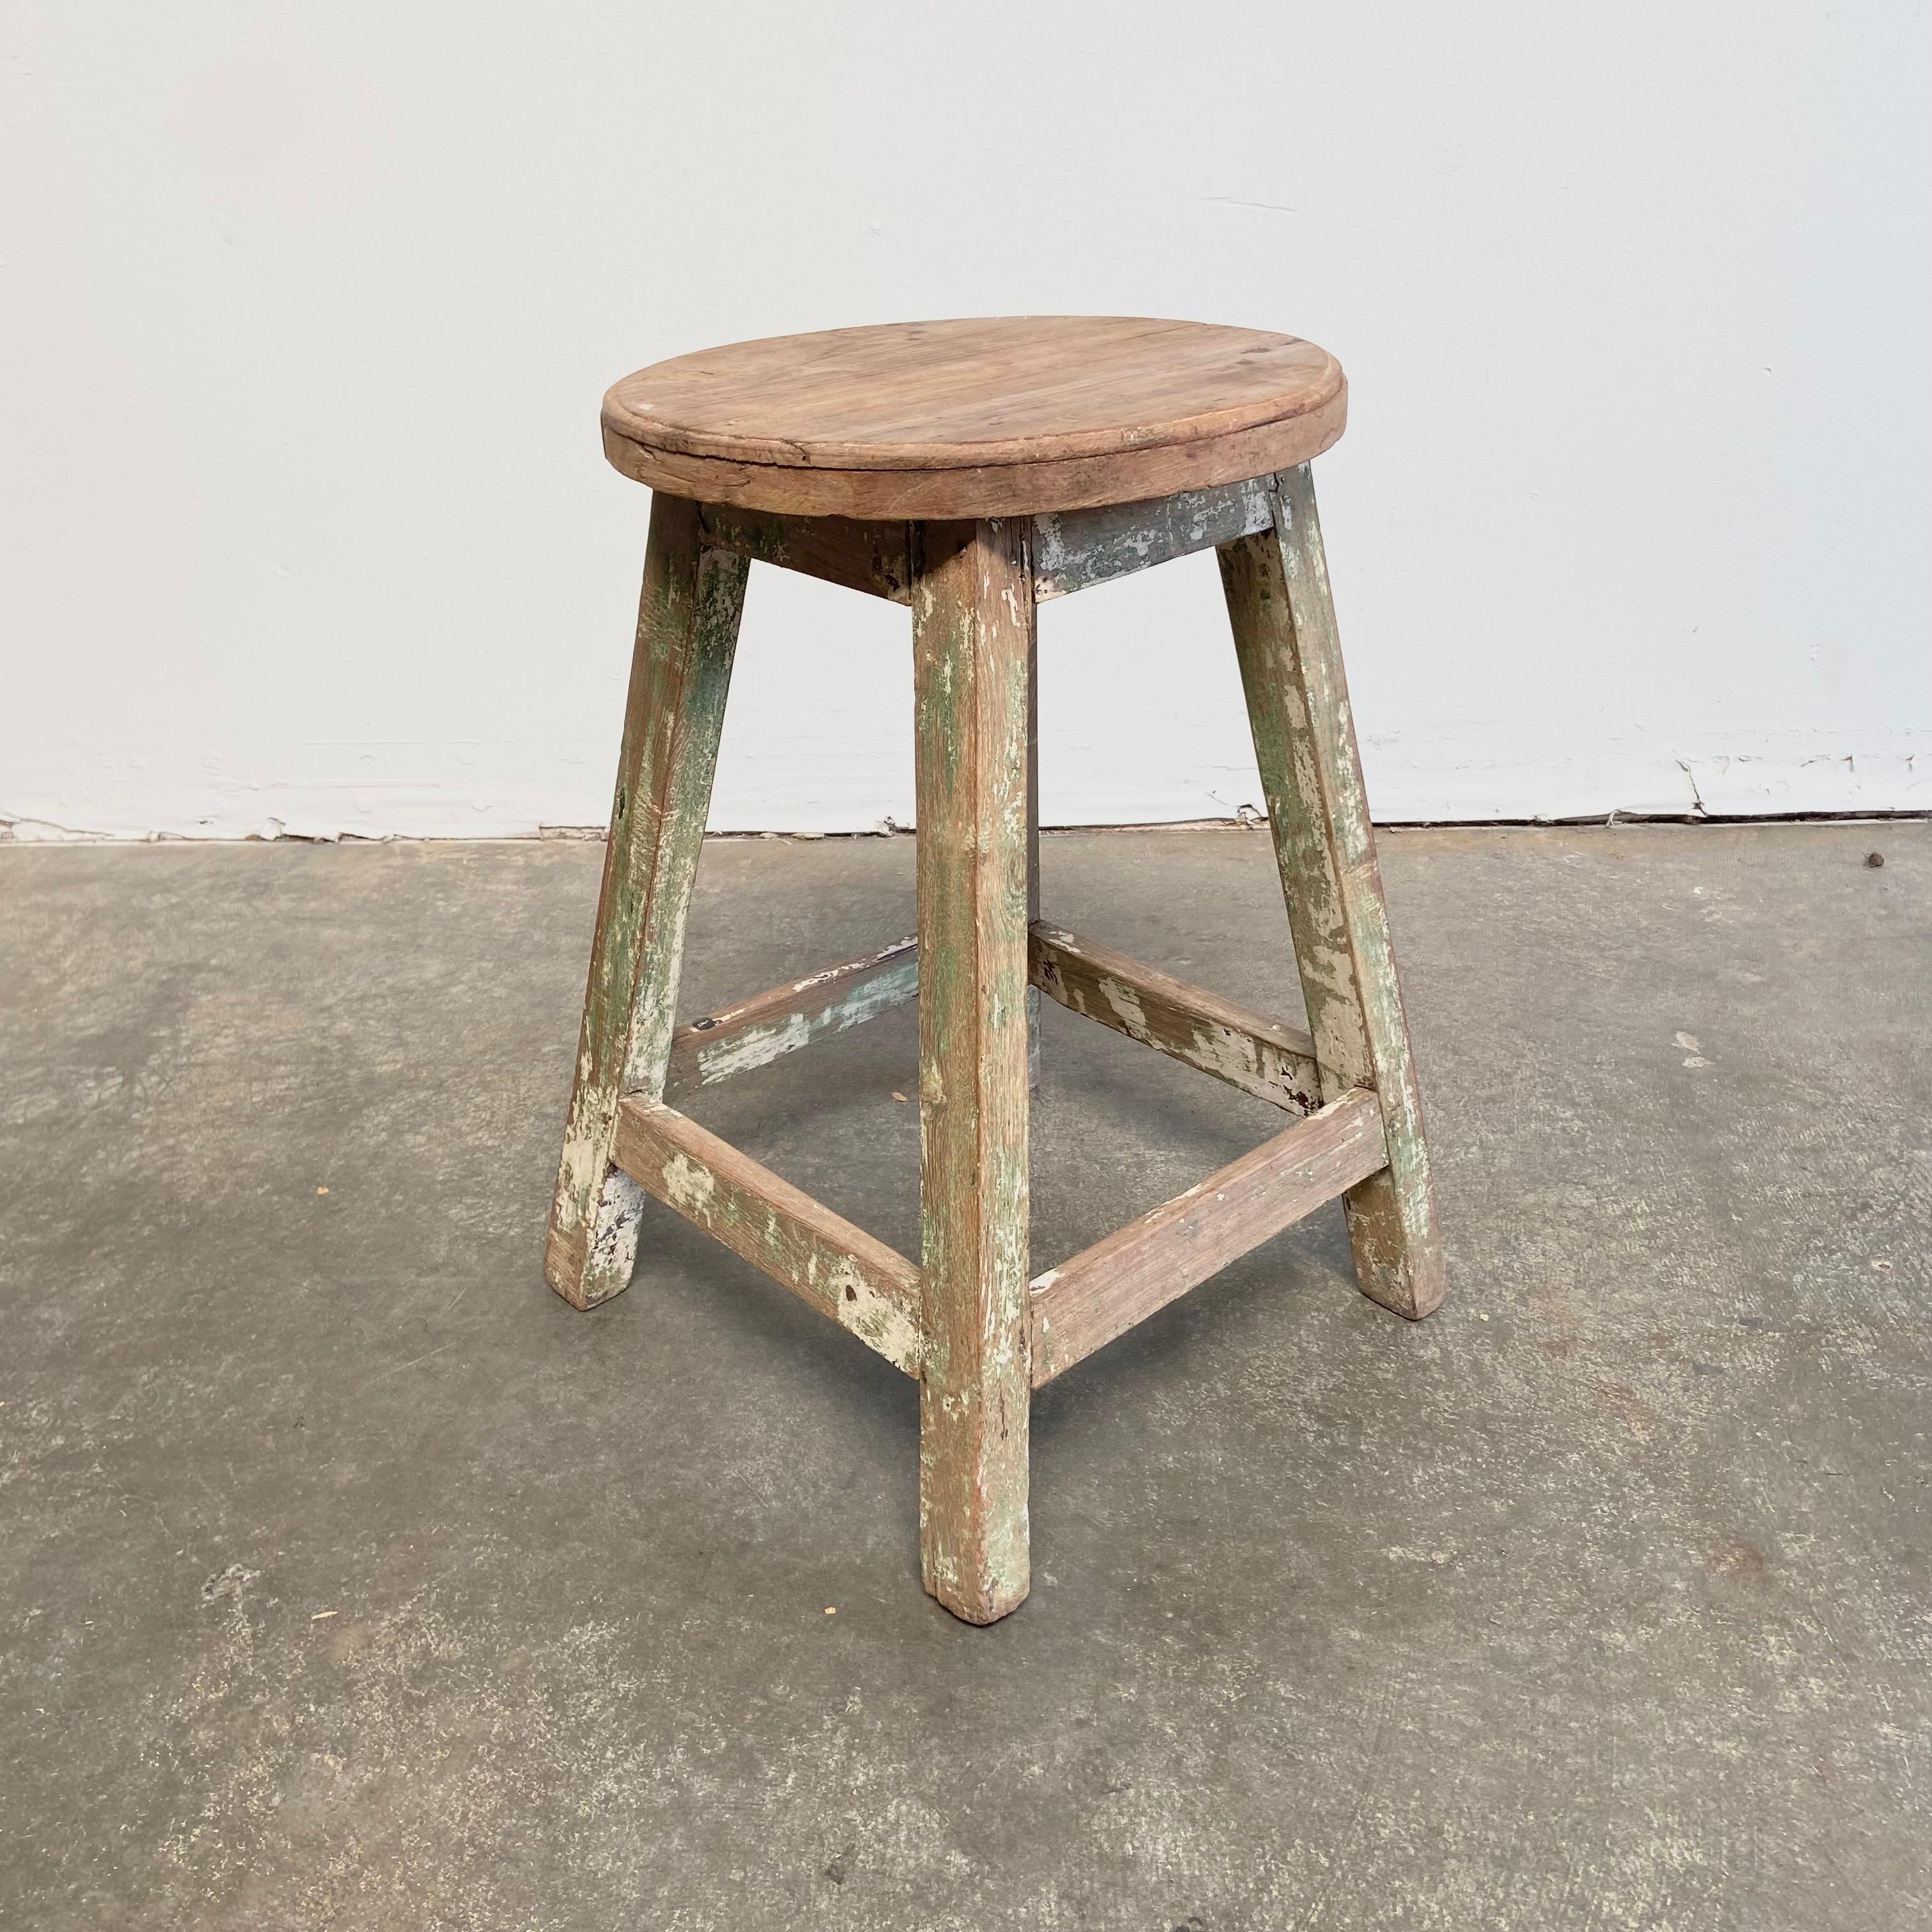 This rustic elm wood side table or stool has a green and white faded paint finish.
Solid and Sturdy, ready for everyday use.
Measures: 17” x 17” x 23.5